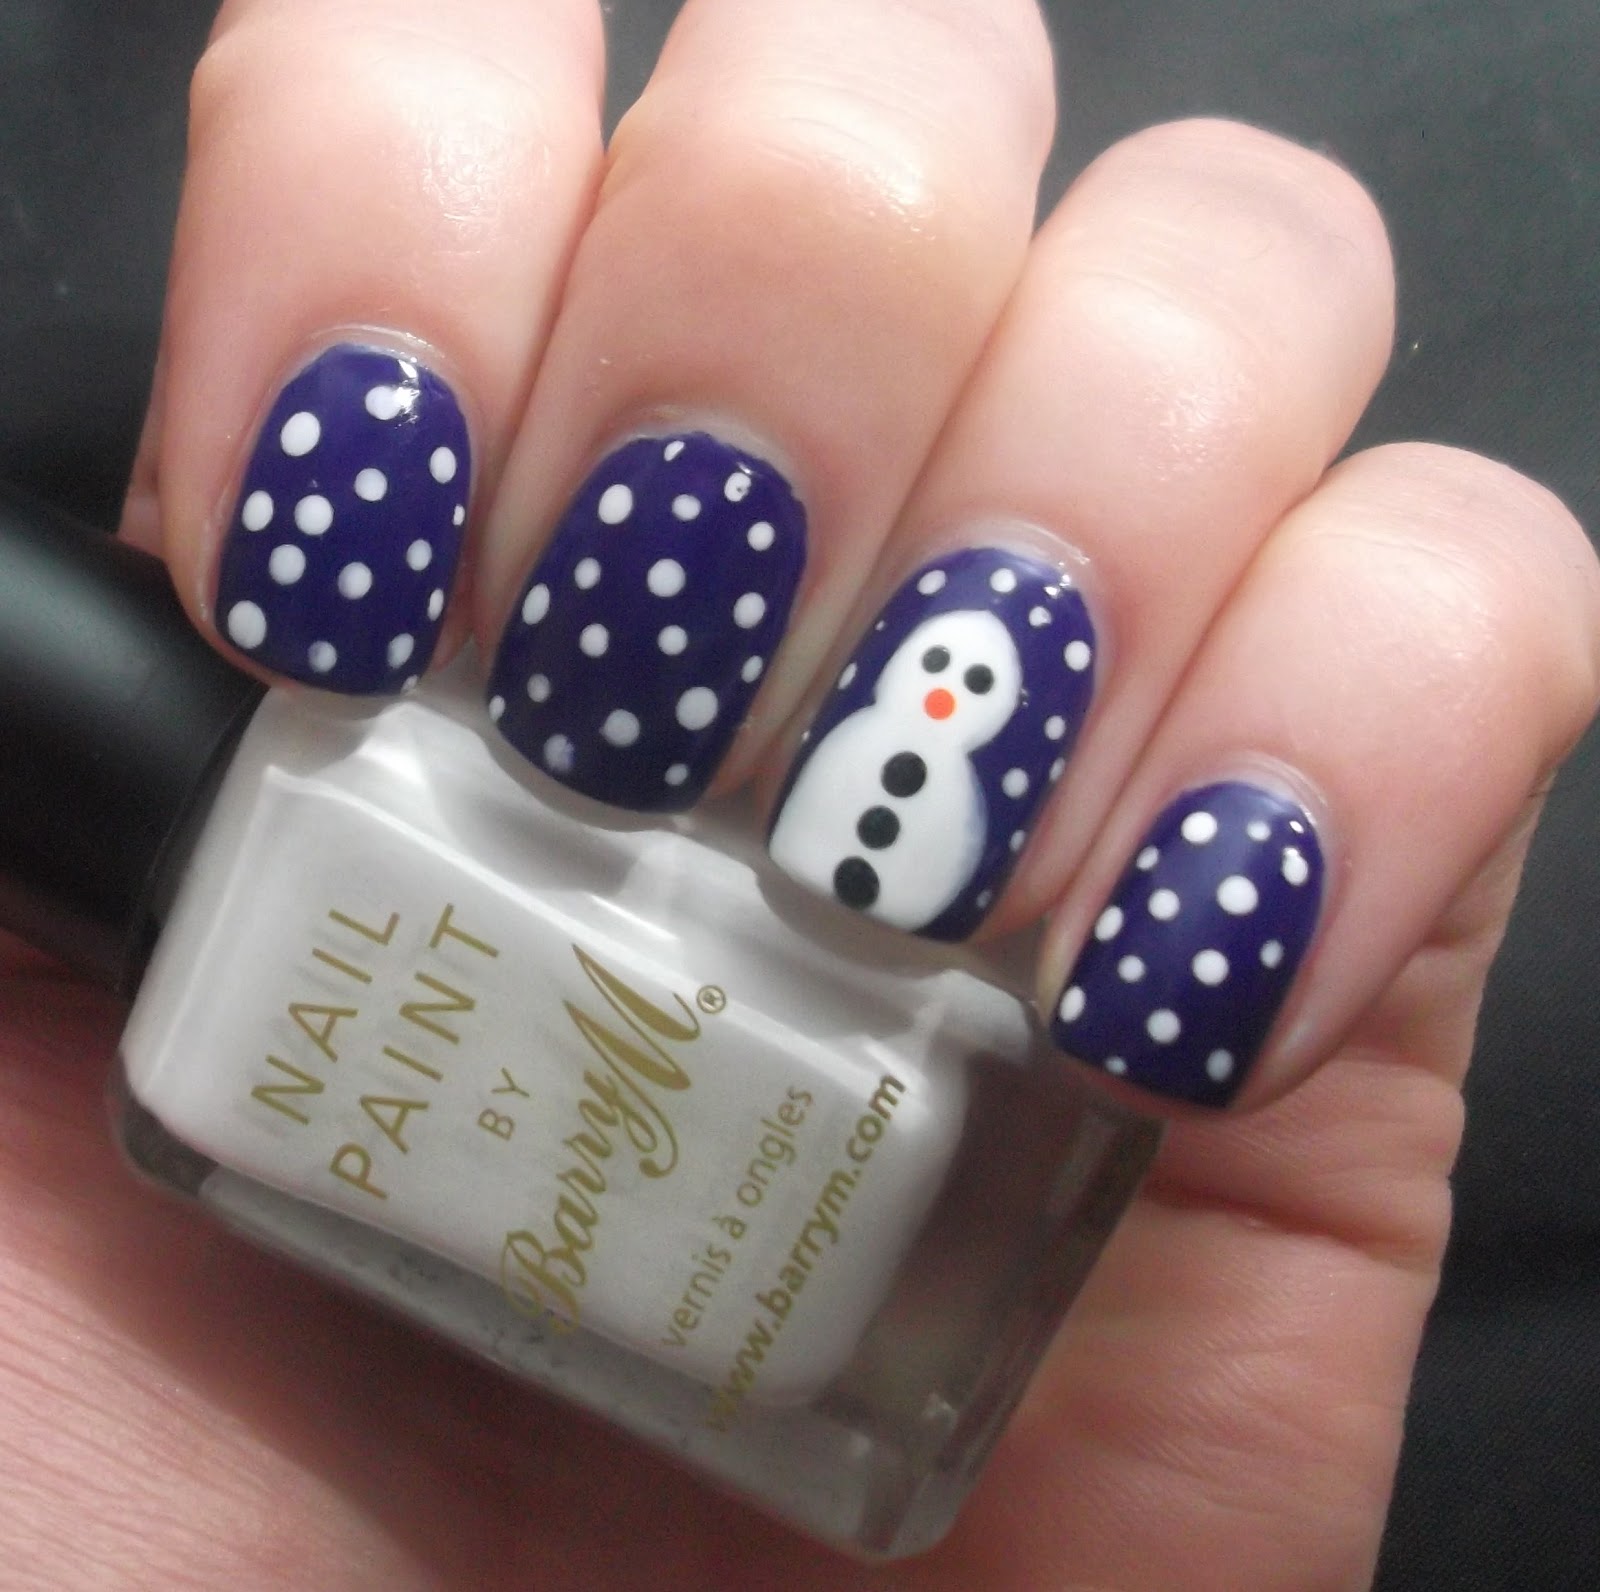 Lou is Perfectly Polished: Christmas Nails: Snowman